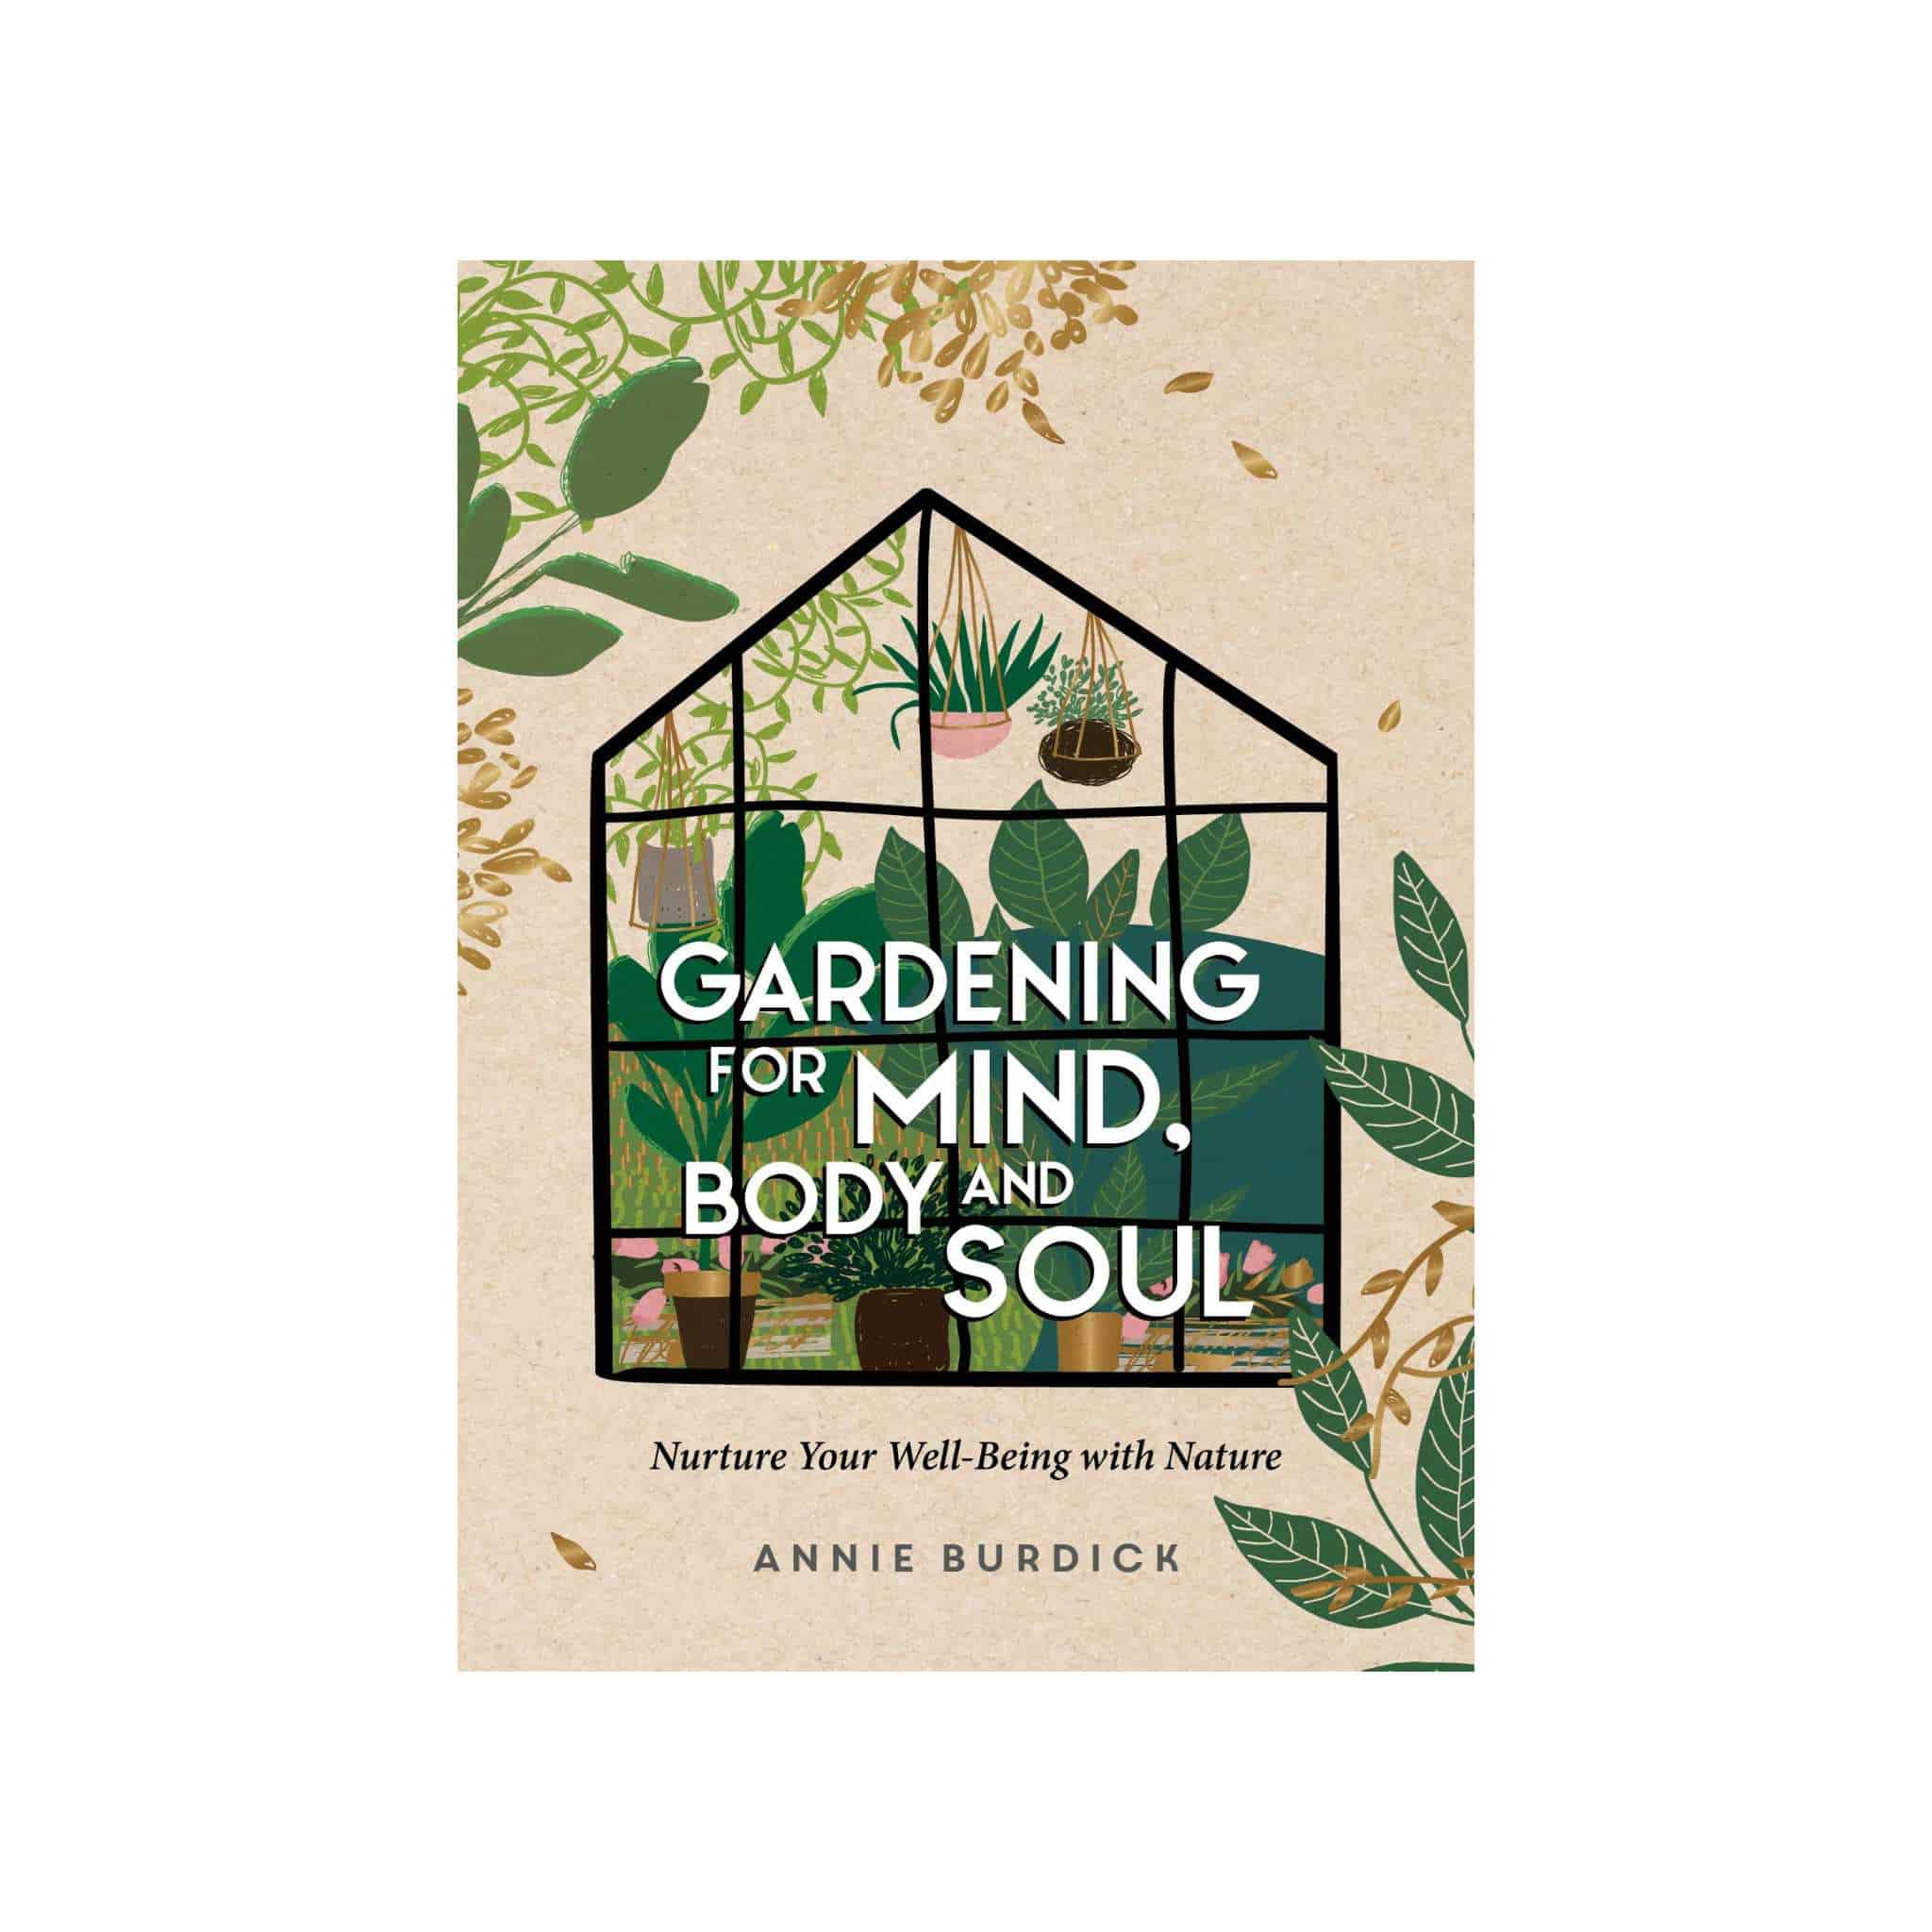 gardening for mind, body and soul book